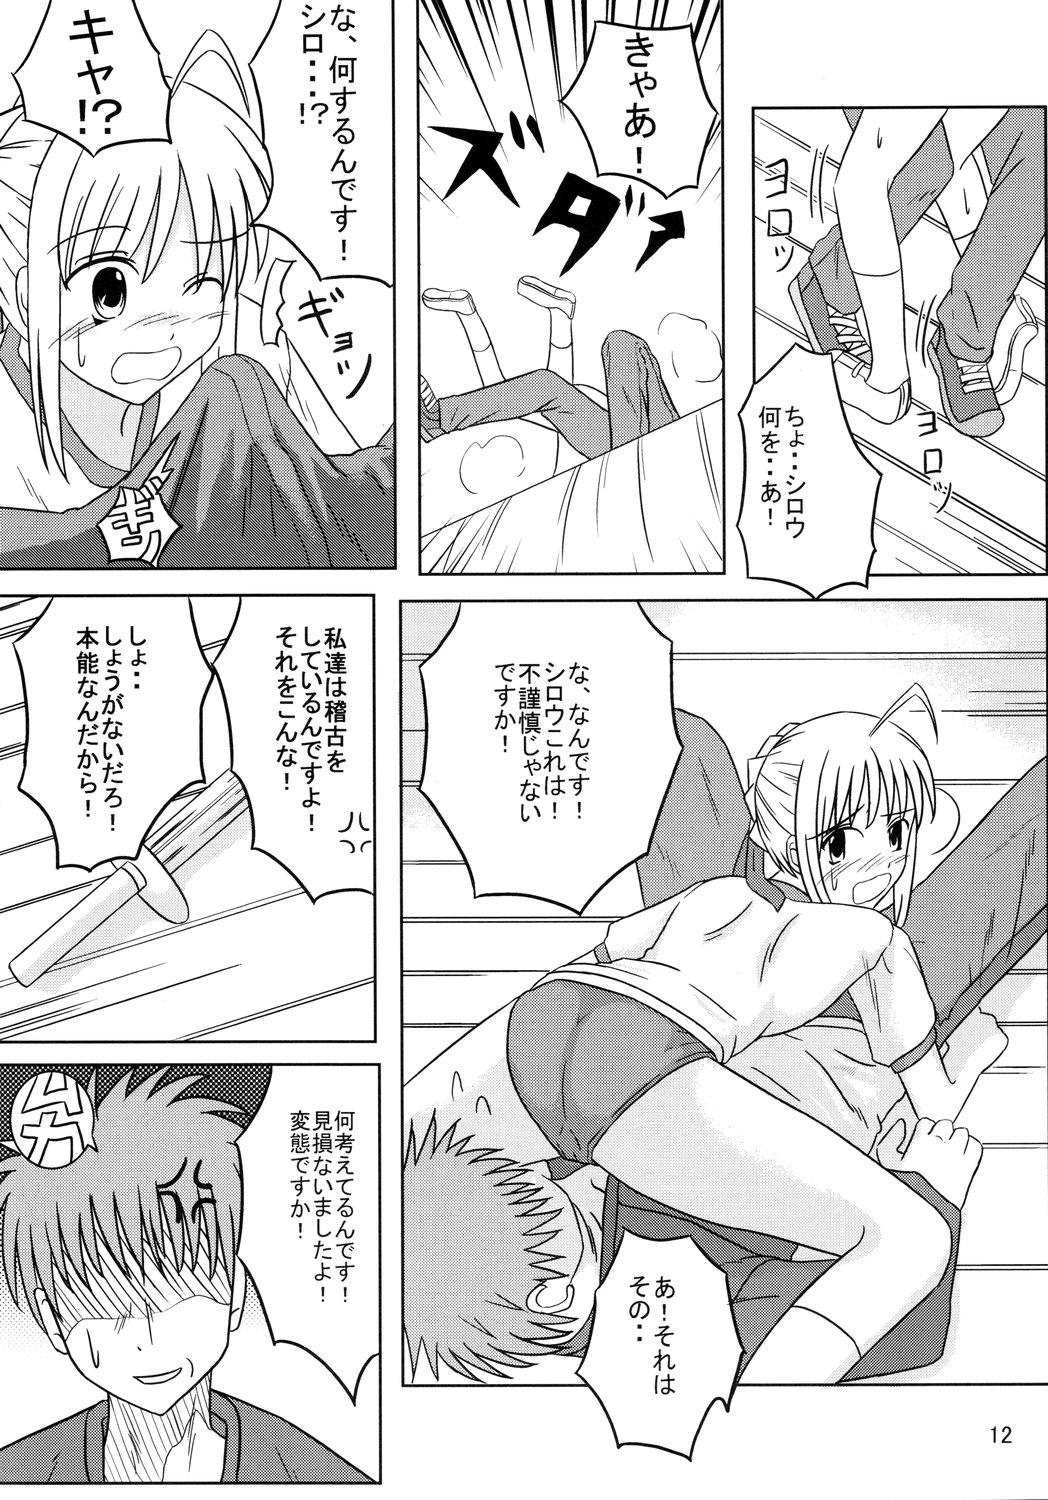 Cream Pie Saber Of Sanity - Fate stay night Lesbians - Page 11